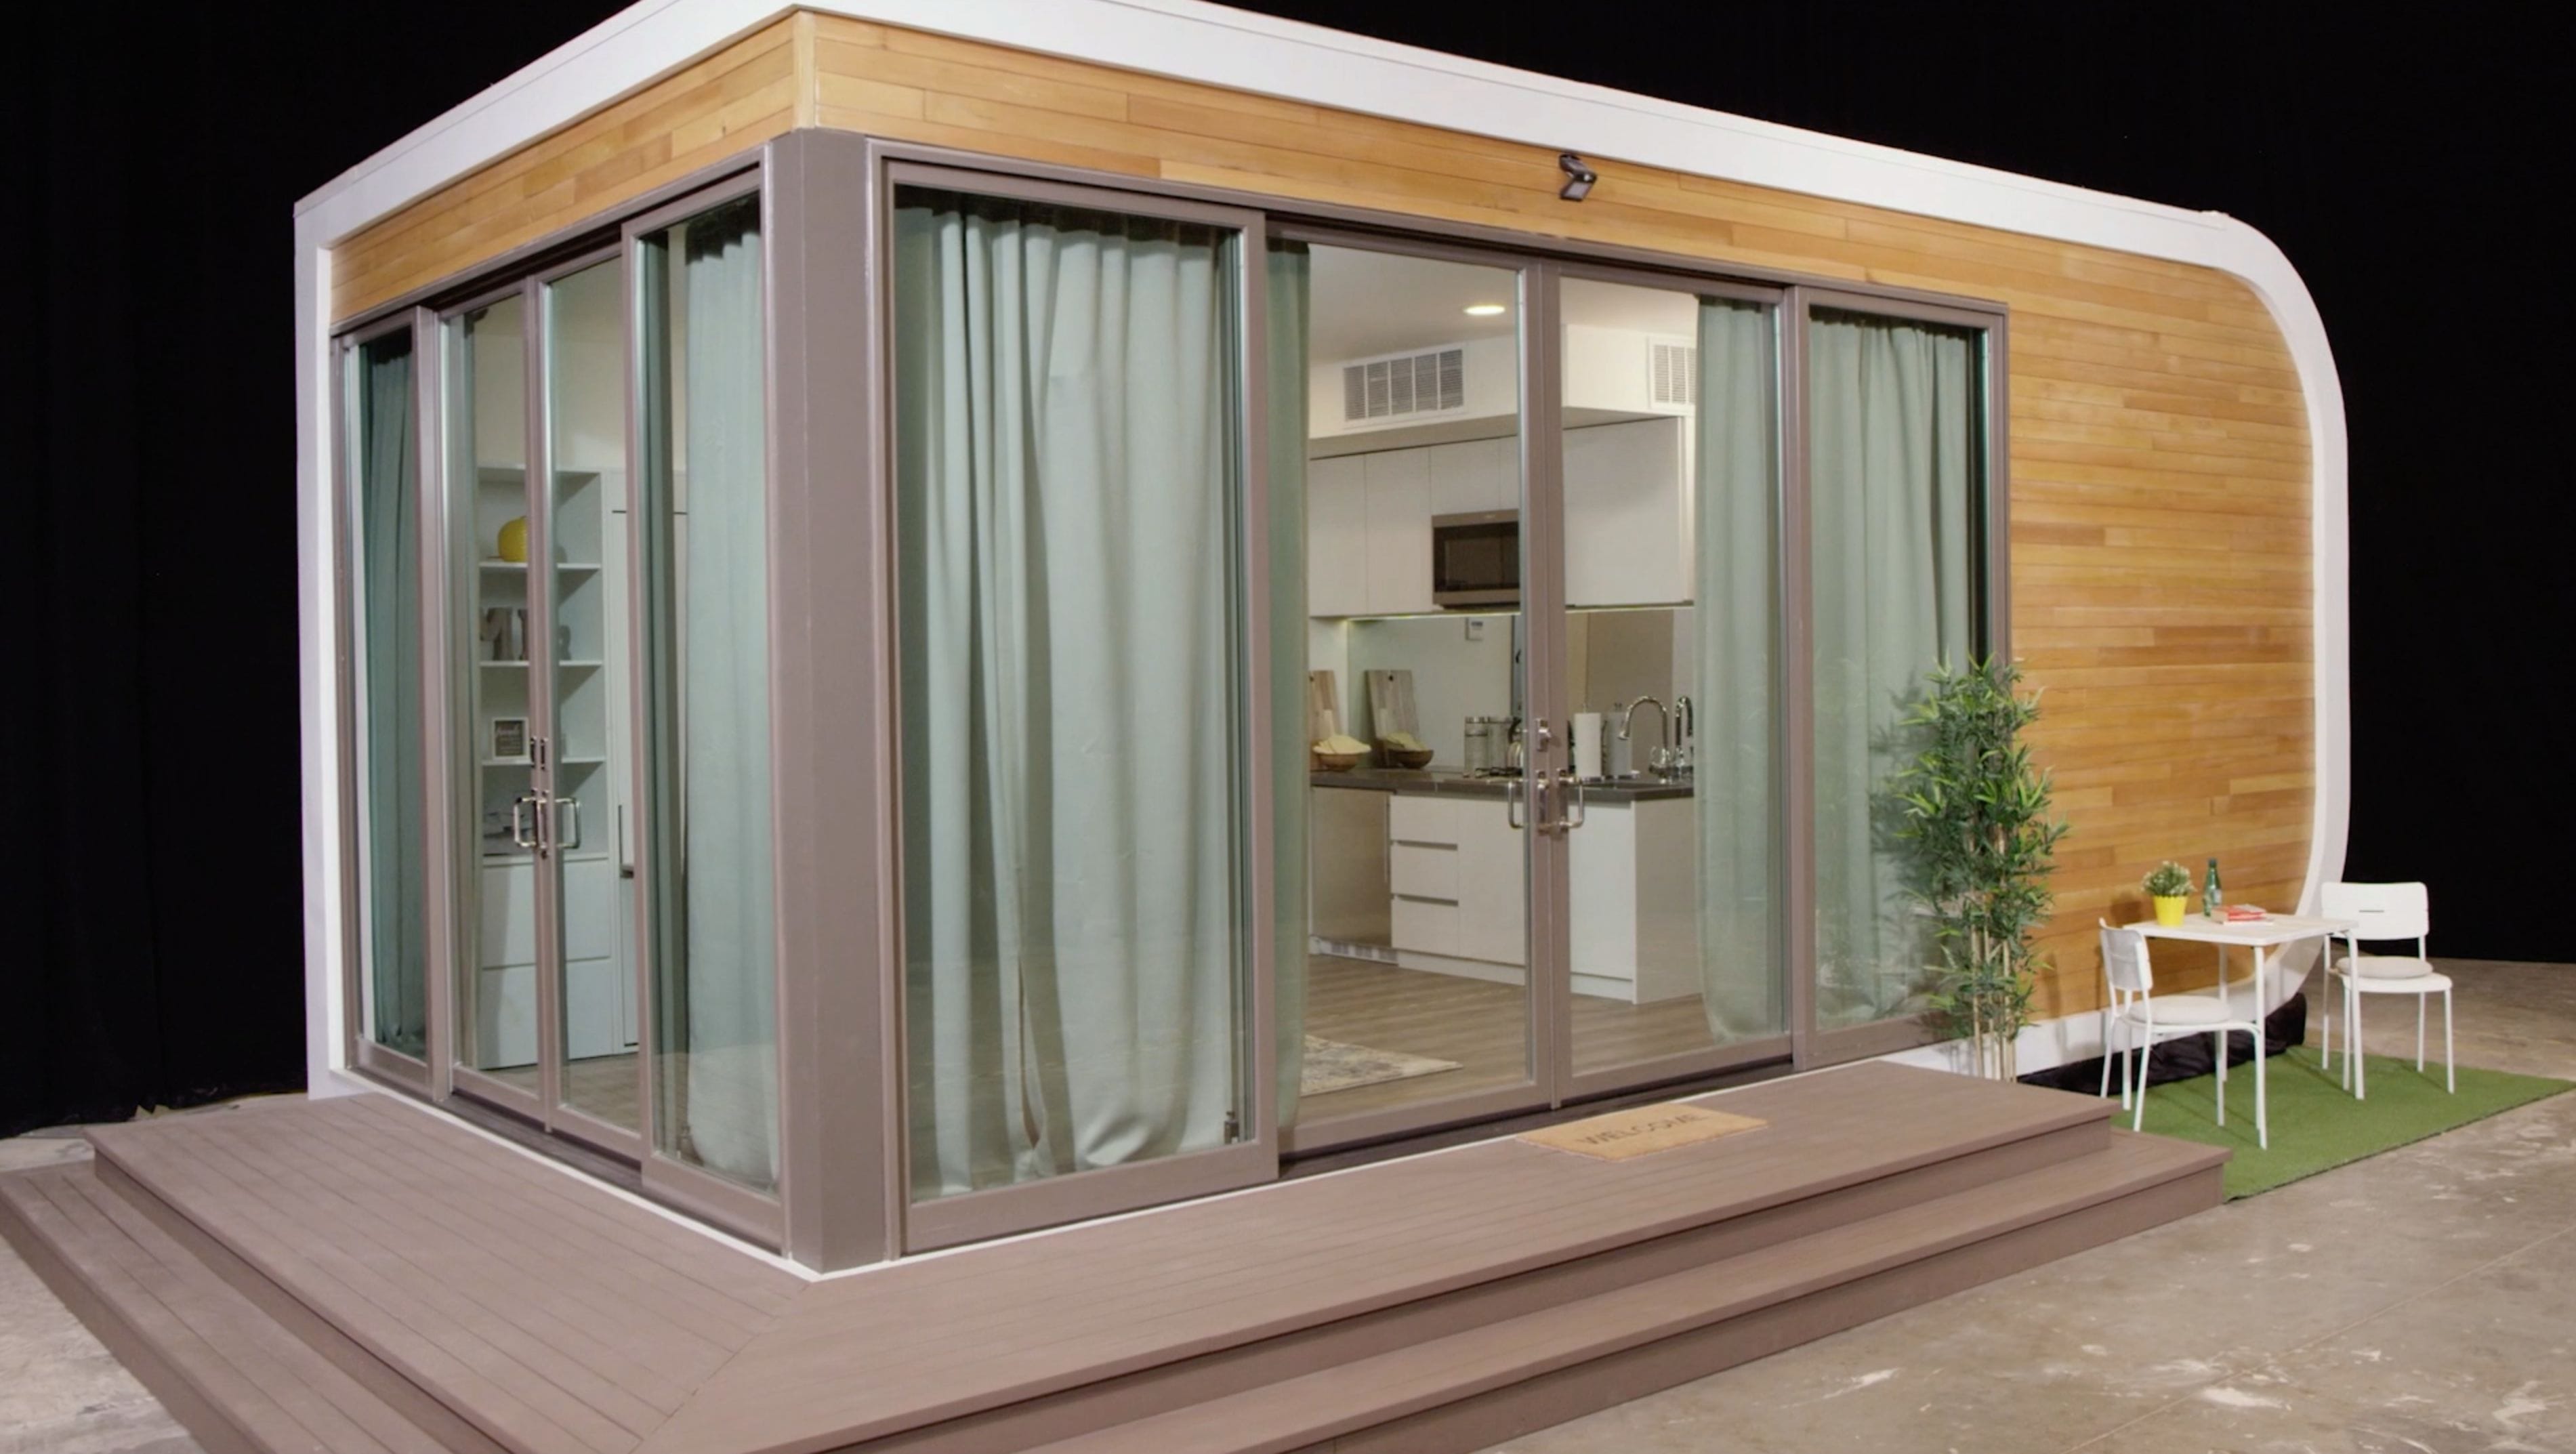 Mighty Buildings will soon build 3D-printed homes in California